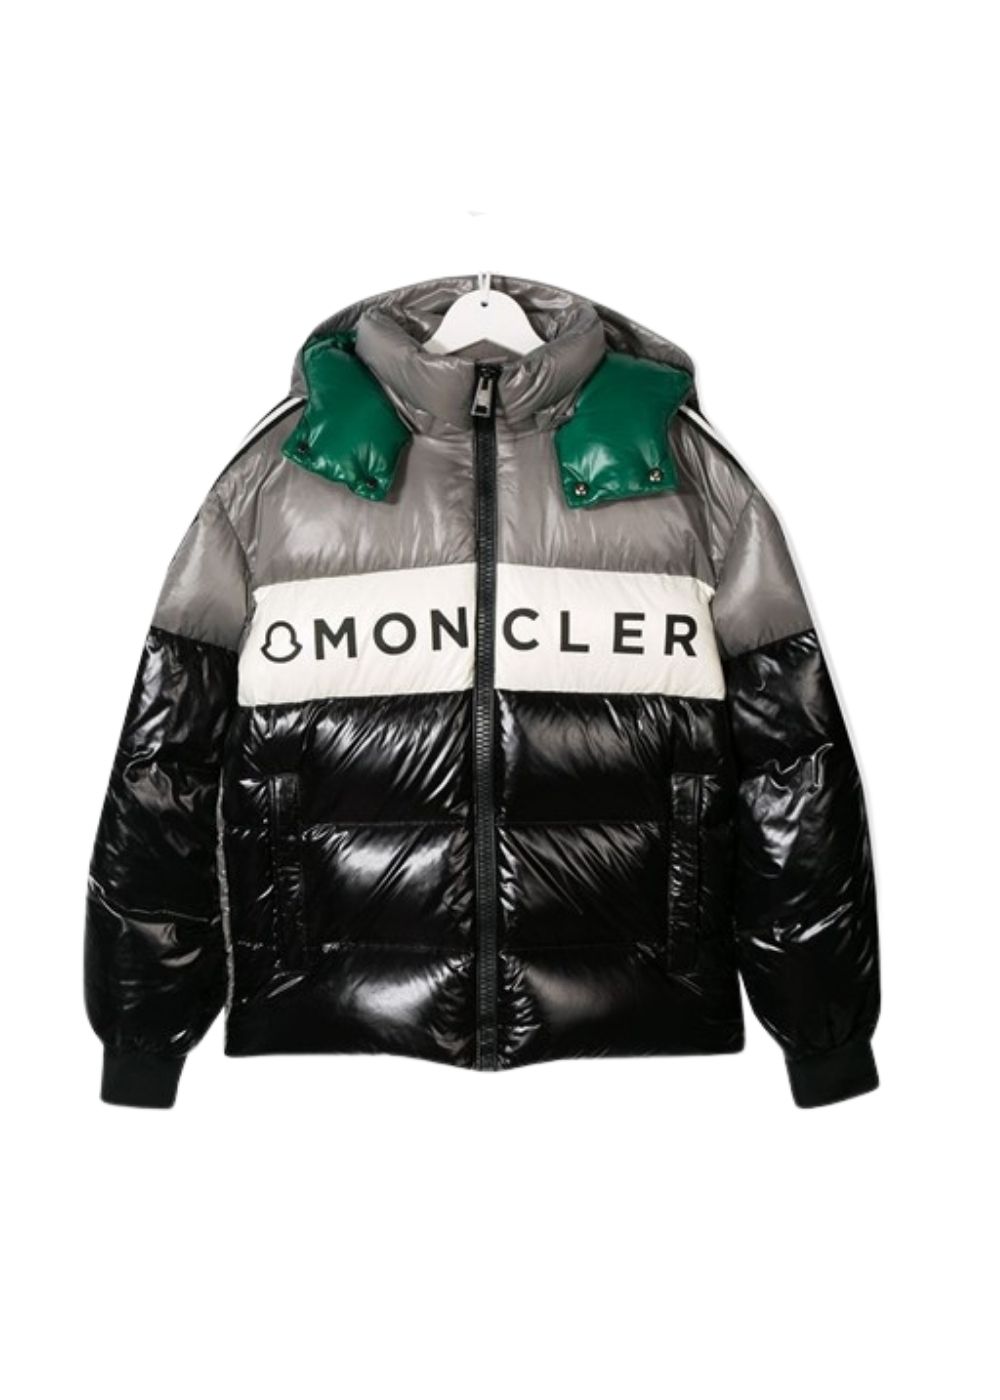 Featured image for “MONCLER FEBREGE”